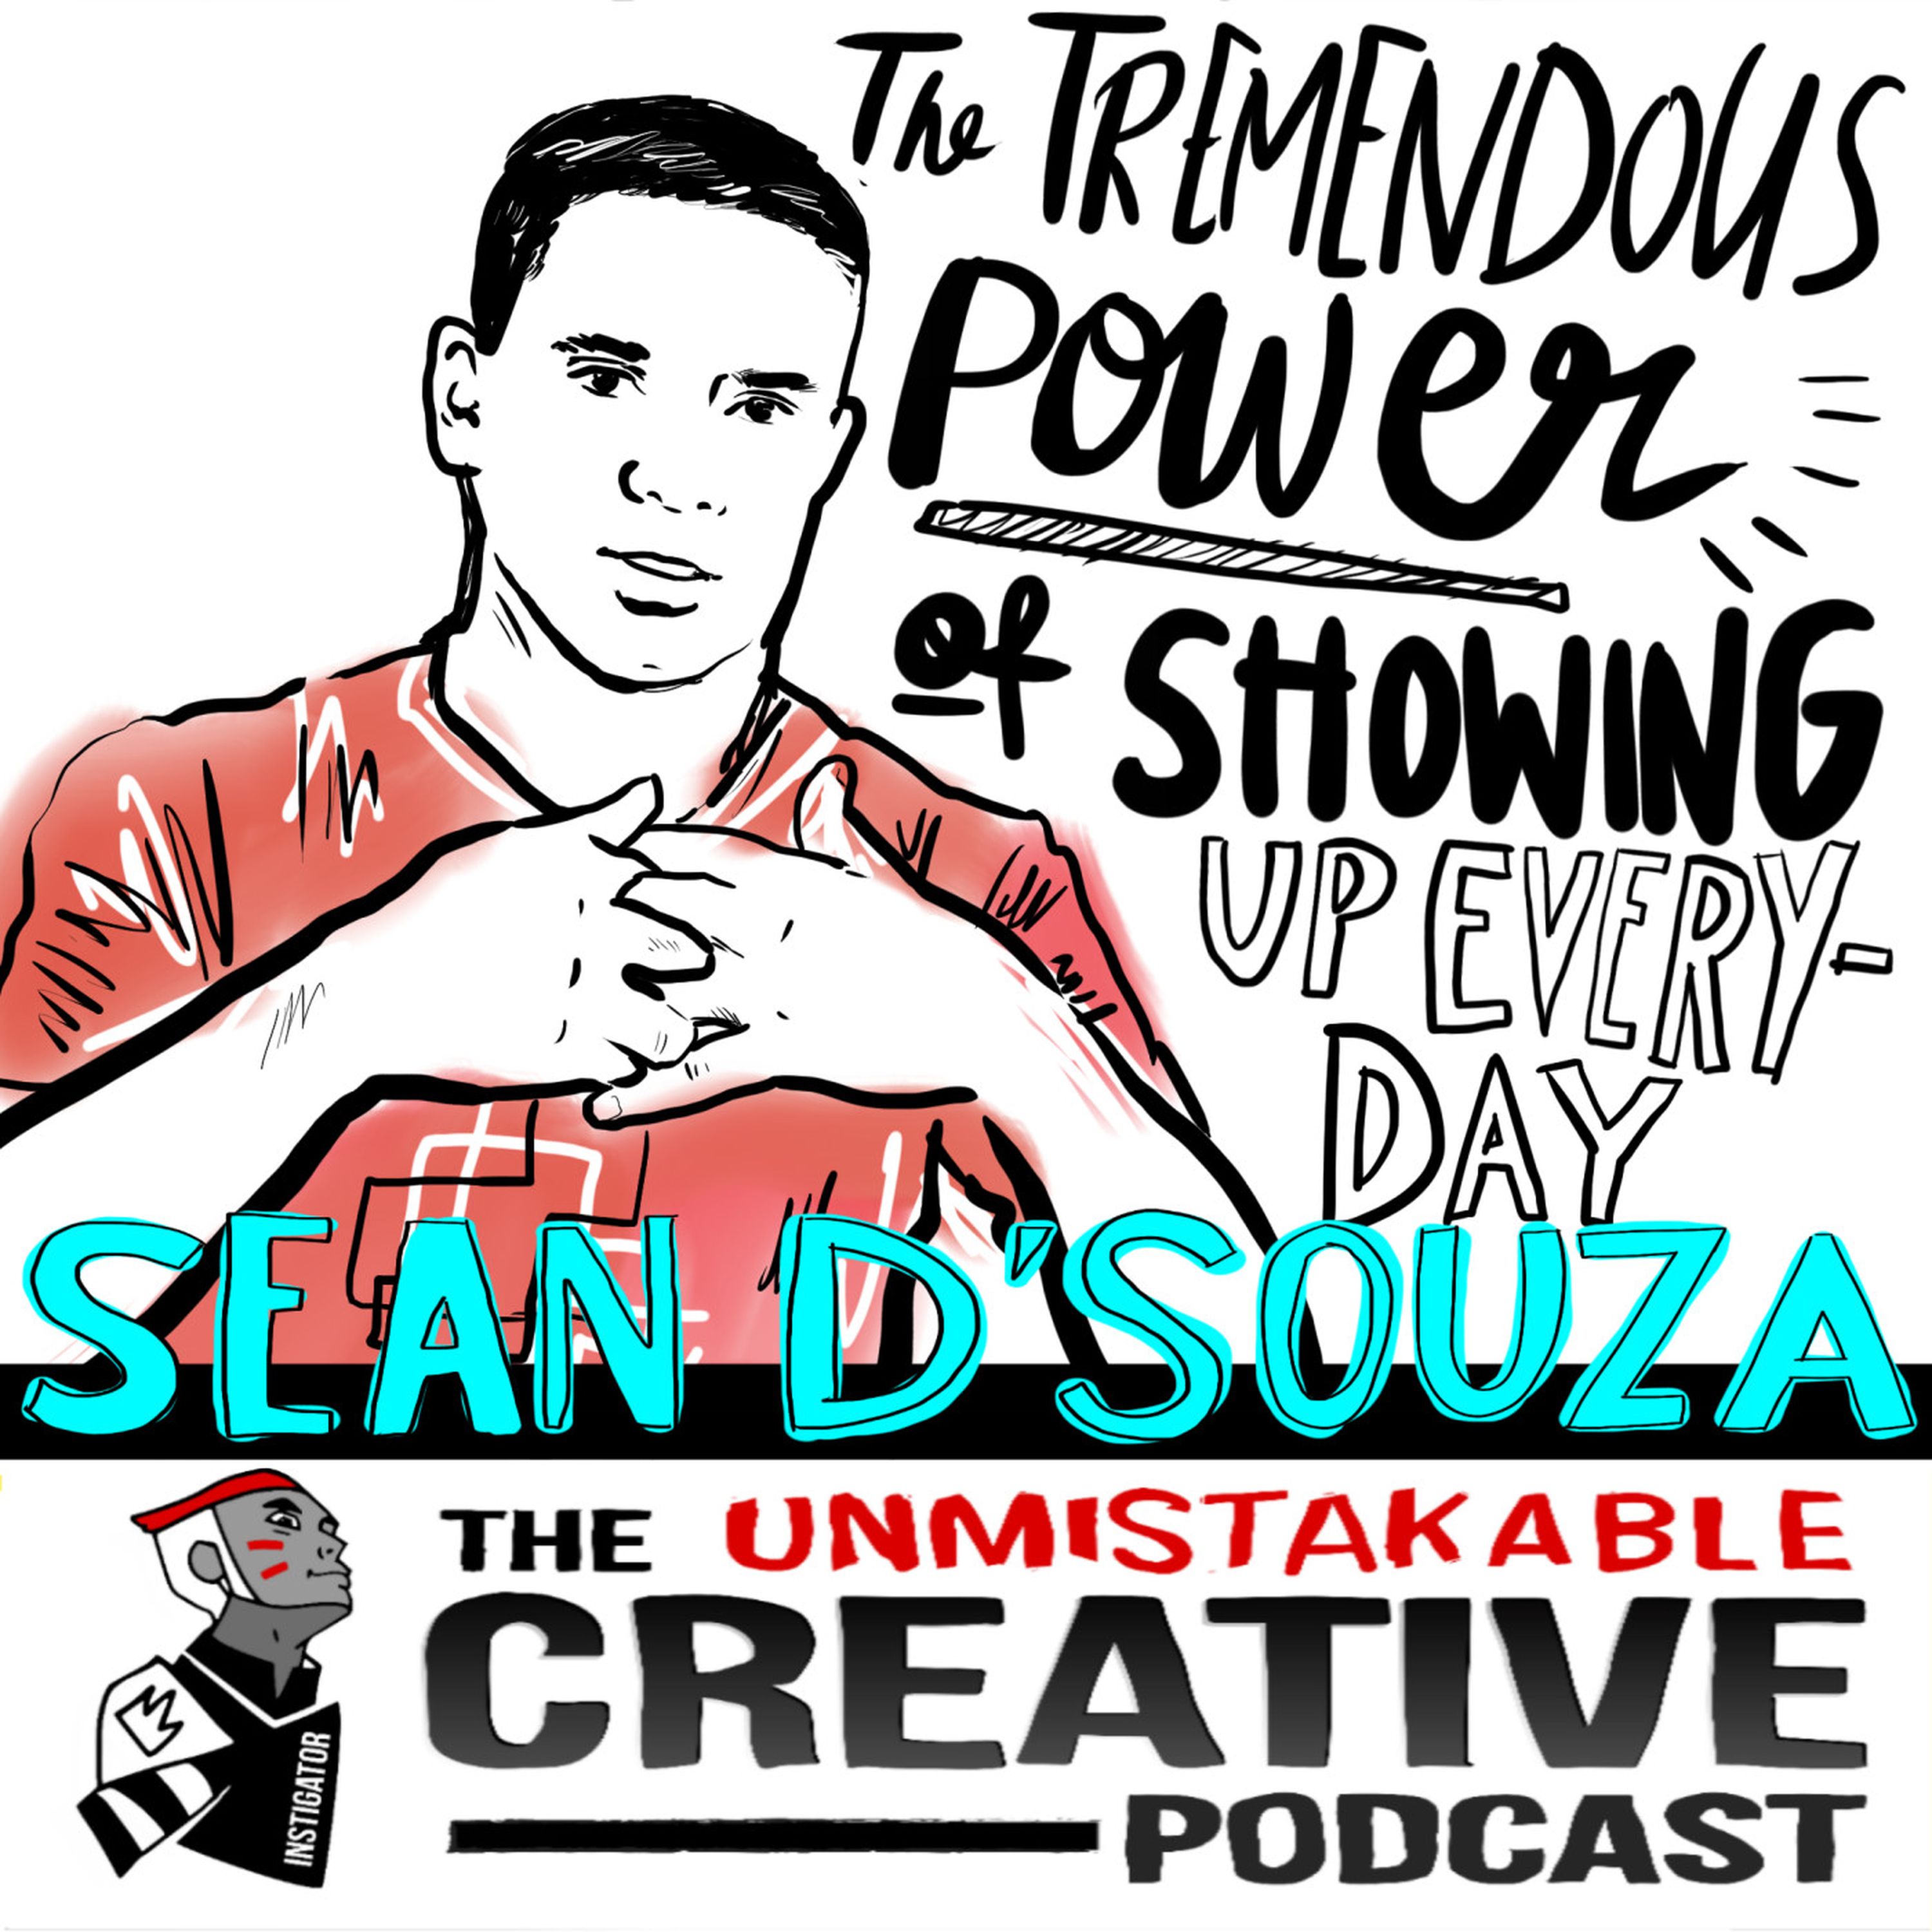 The Tremendous Power of Showing up Everyday with Sean D’ Souza